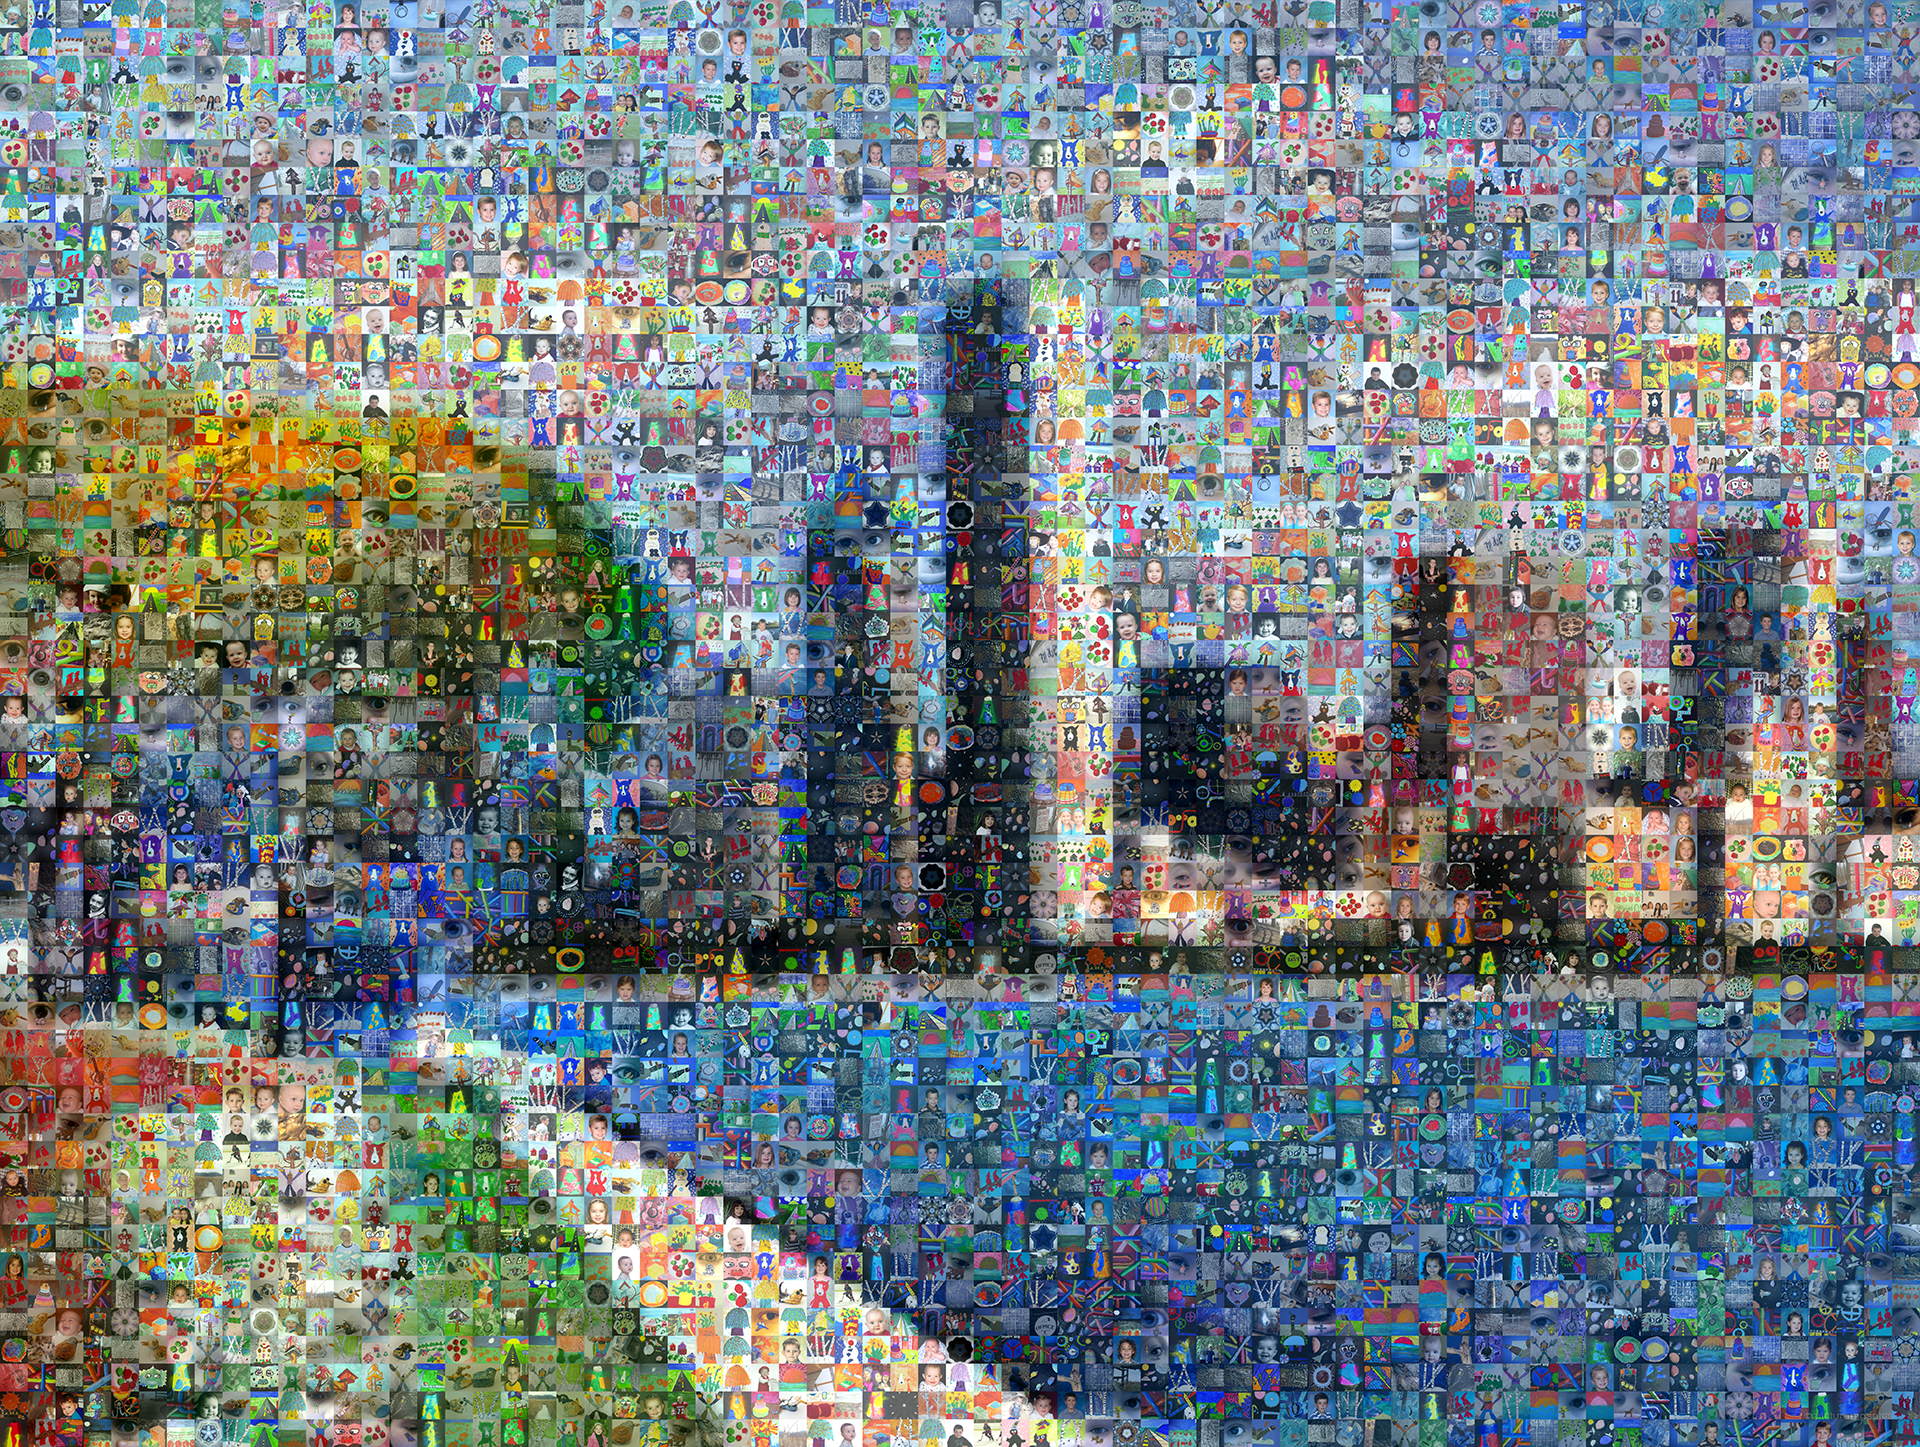 photo mosaic created using over 1080 photos of children and their art